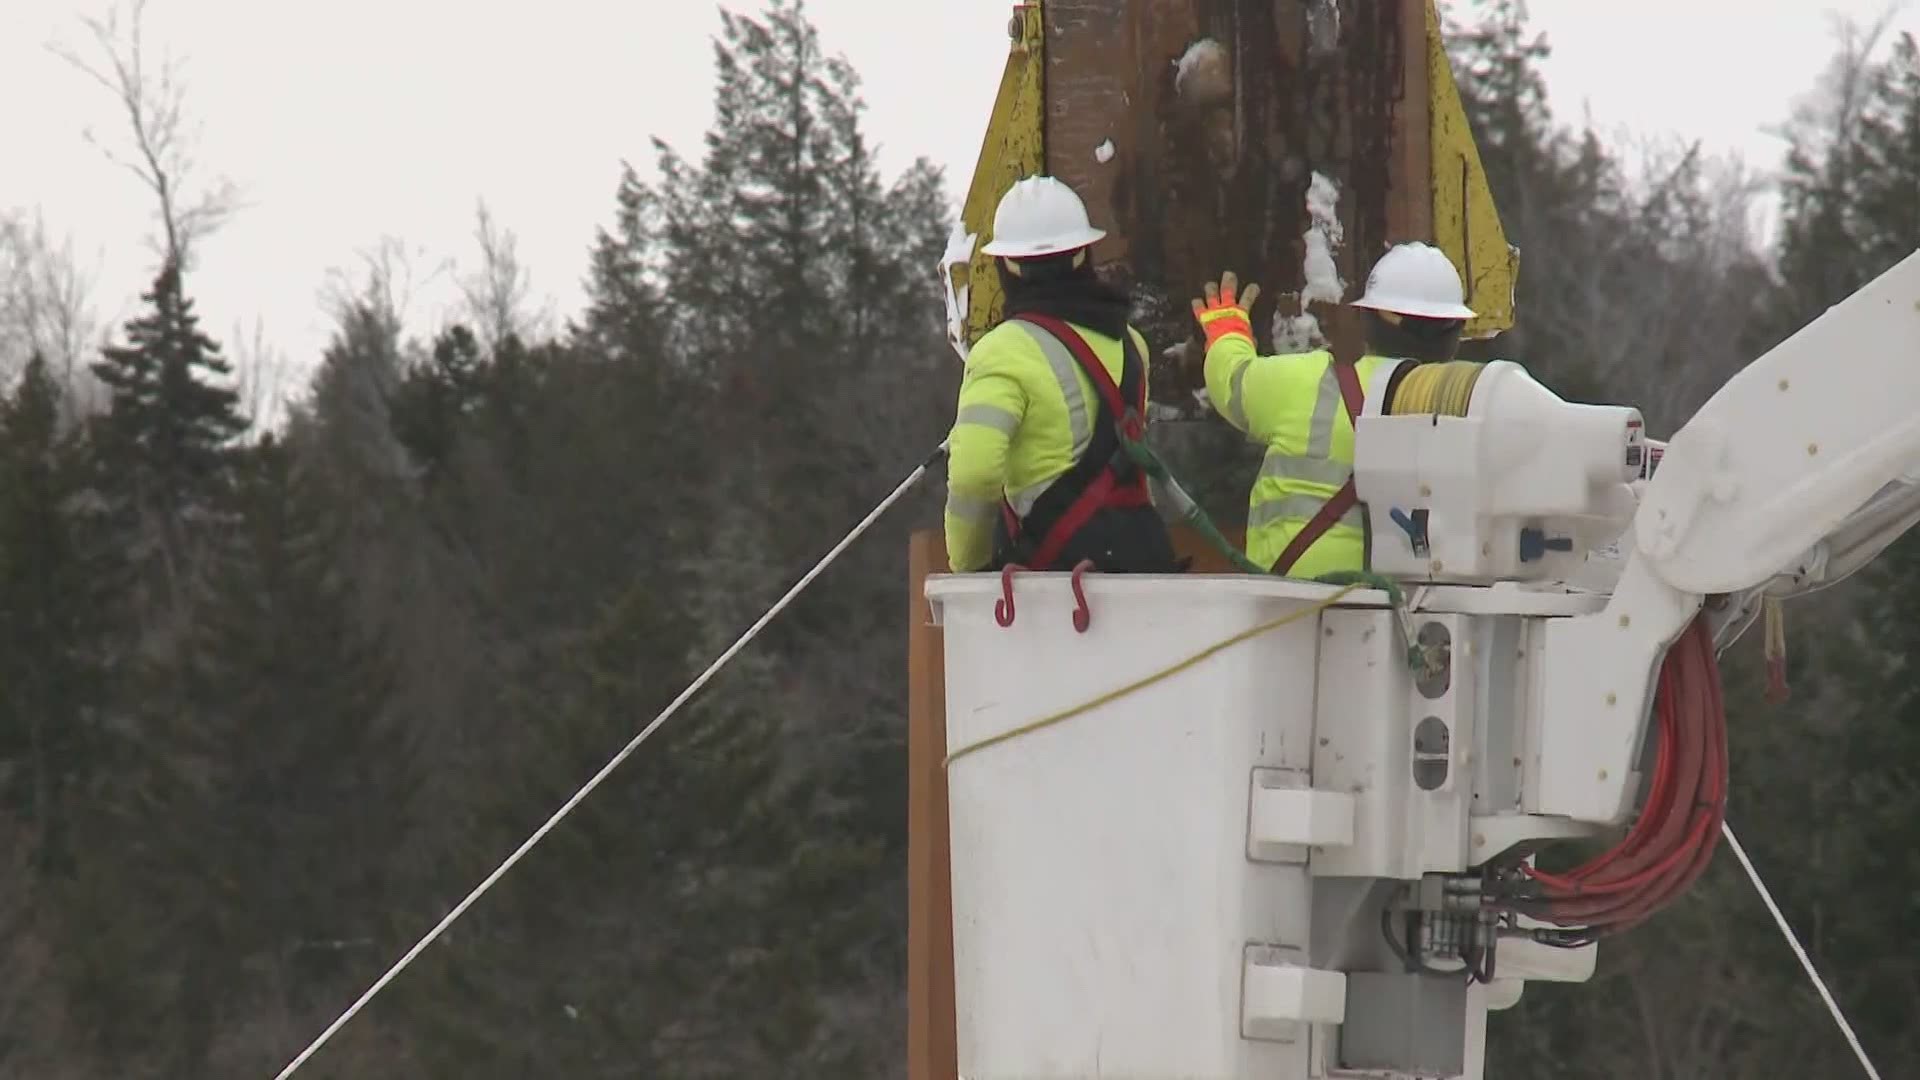 Construction on the Maine side has been going since February in the existing corridor, and now they have started clearing trees in the new, most controversial part.